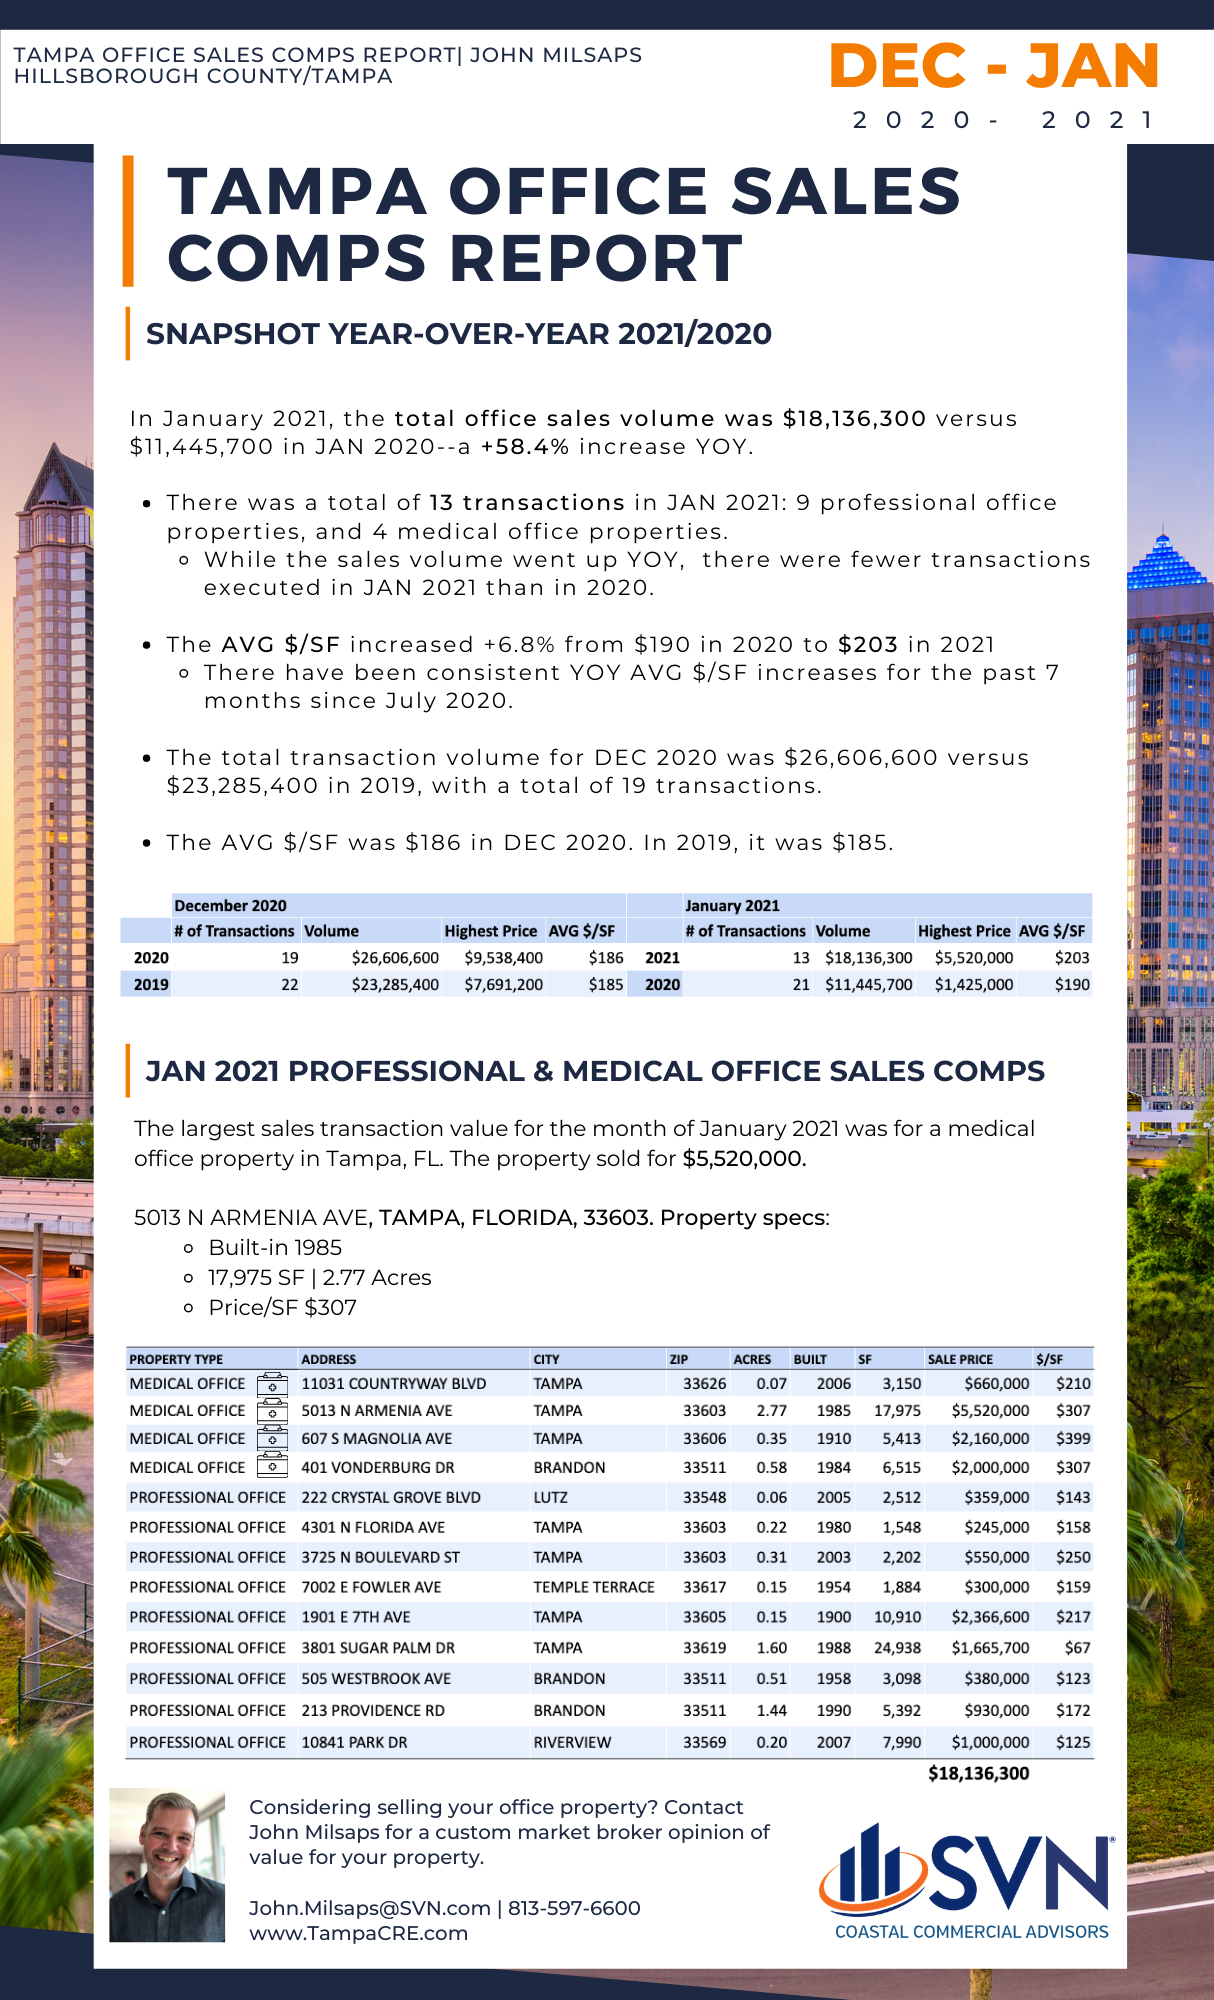 Tampa Office Sales Comps JAN 2021 by John Milsaps 